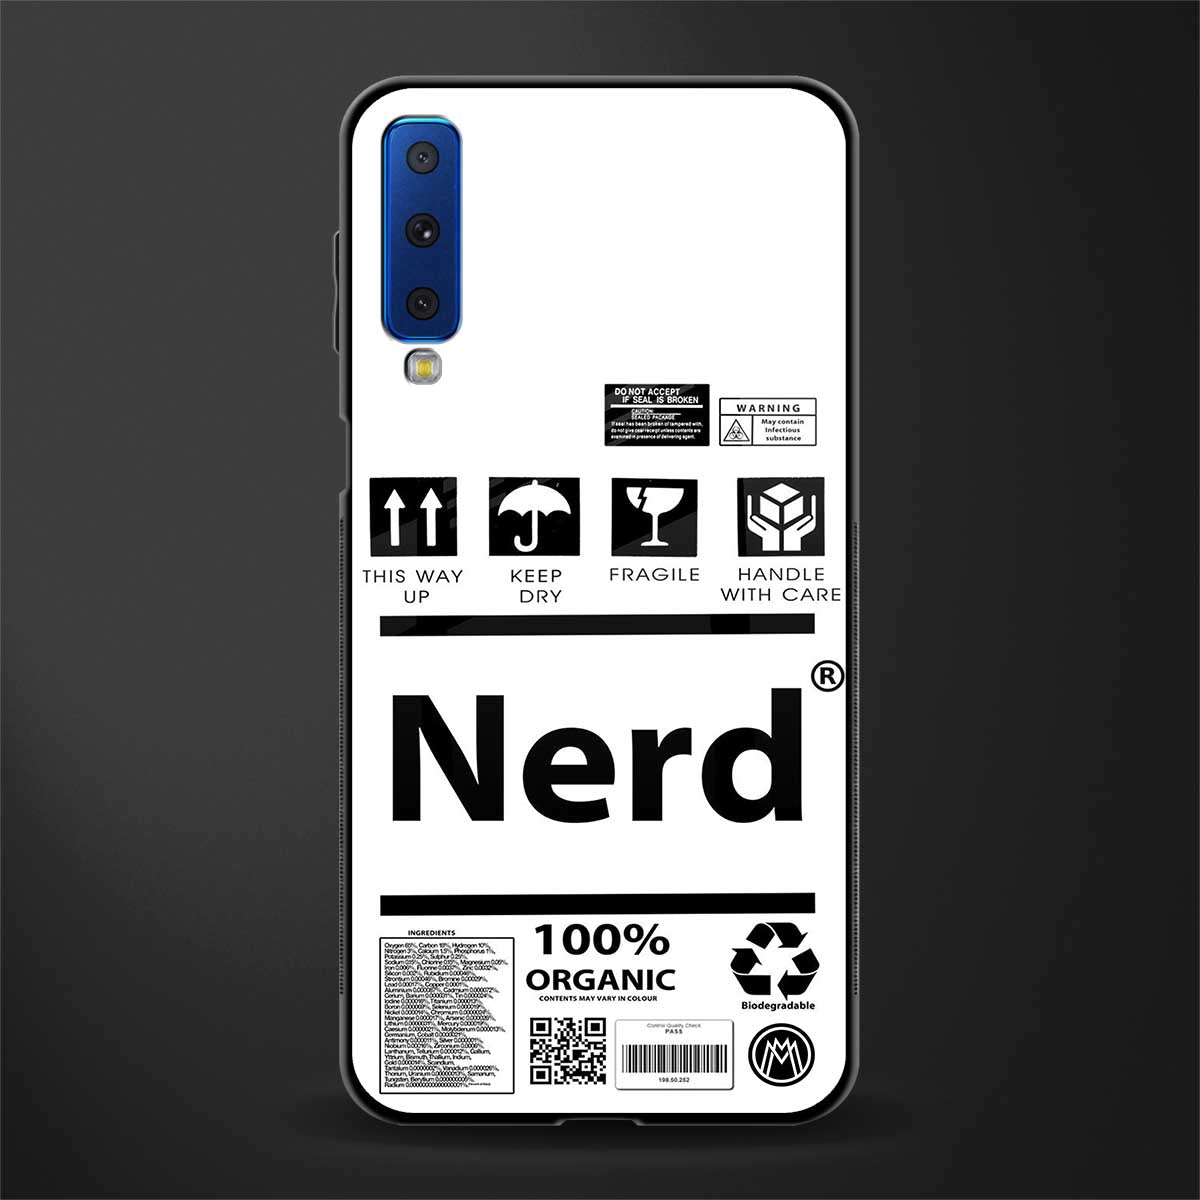 nerd white label glass case for samsung galaxy a7 2018 image